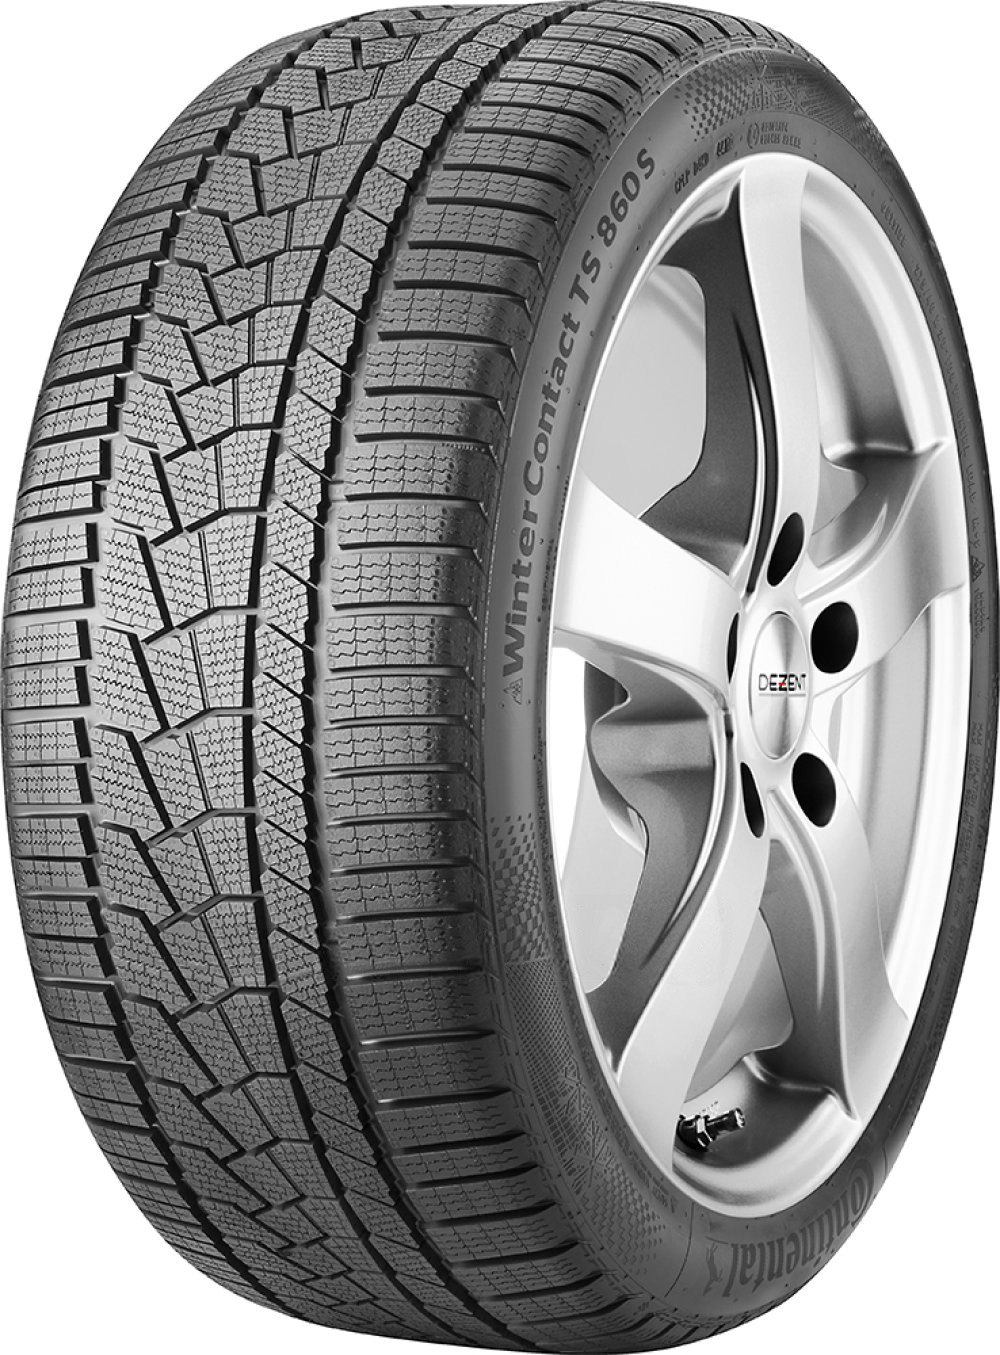 CONTINENTAL WINTERCONTACT TS 860 S 225/60R18 104H